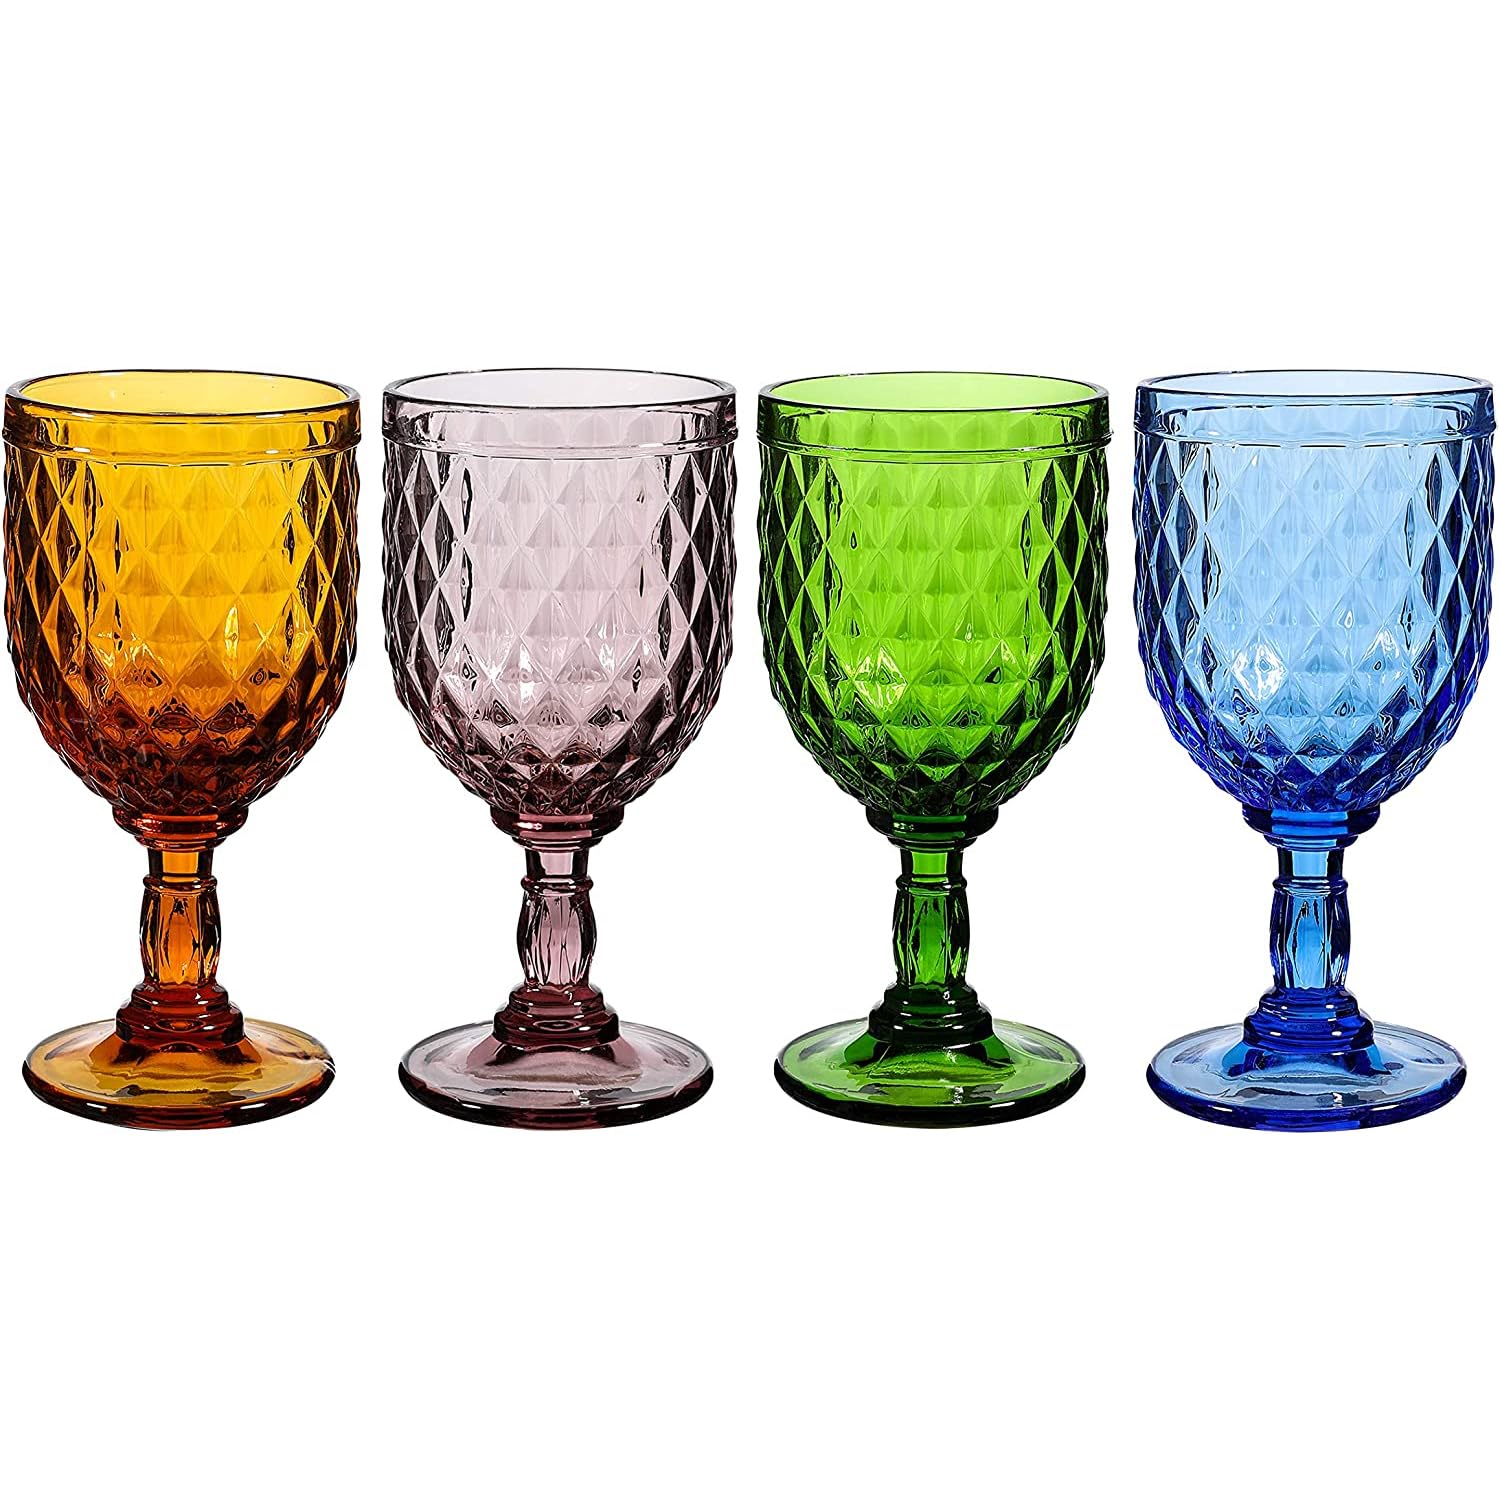 WHOLE HOUSEWARES Vintage Style Colored Glass Water Goblet Set of 4 Multi Colors Drinking Glasses (11 OZ)